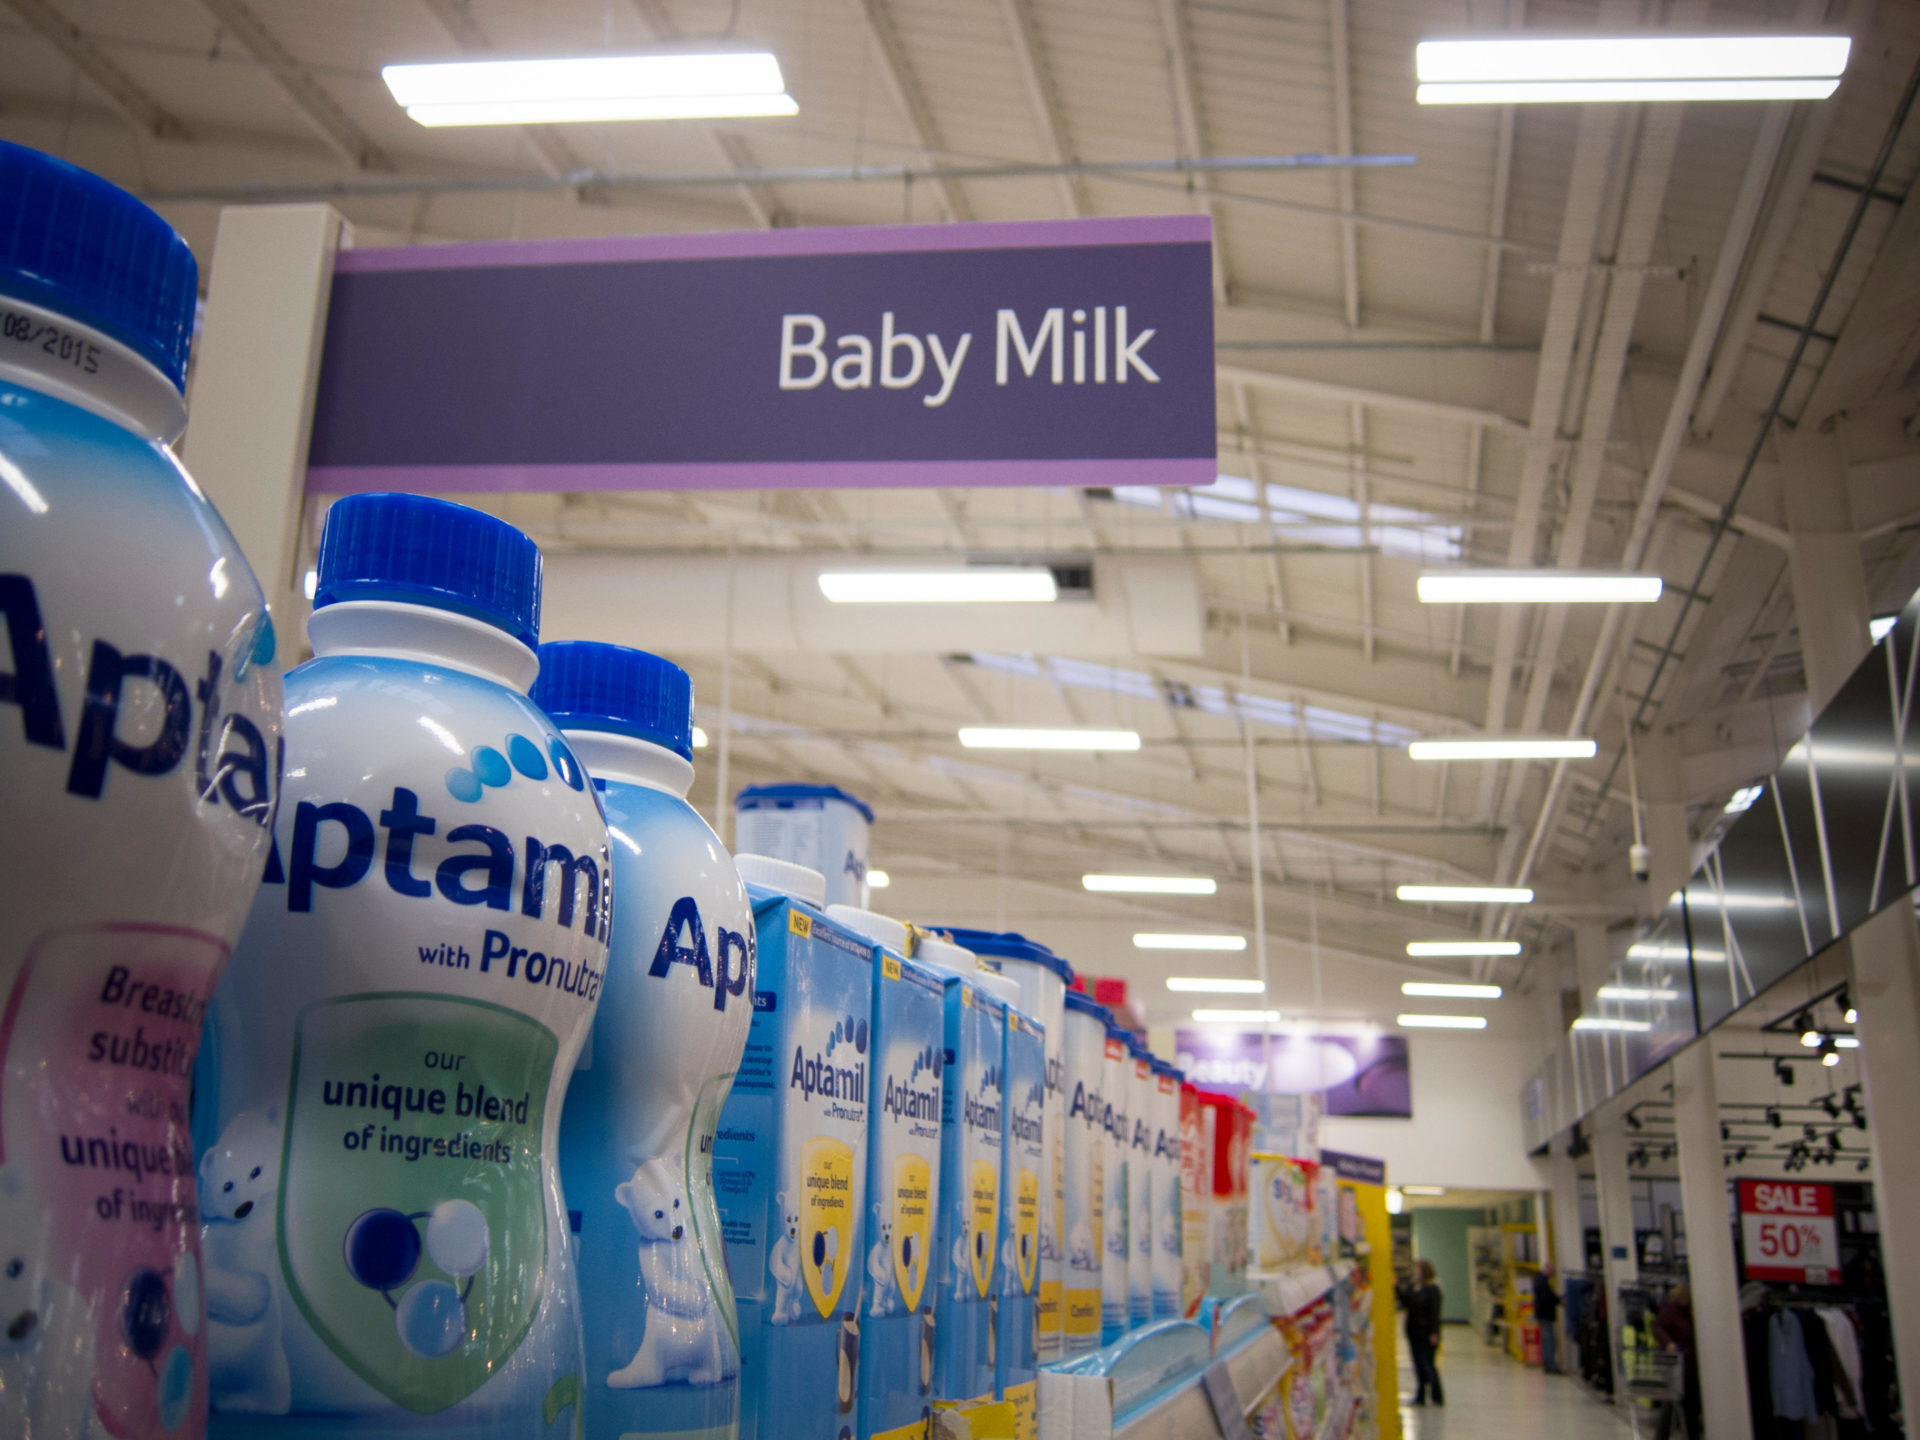 Baby milk products and isle at a Teso supermarket store